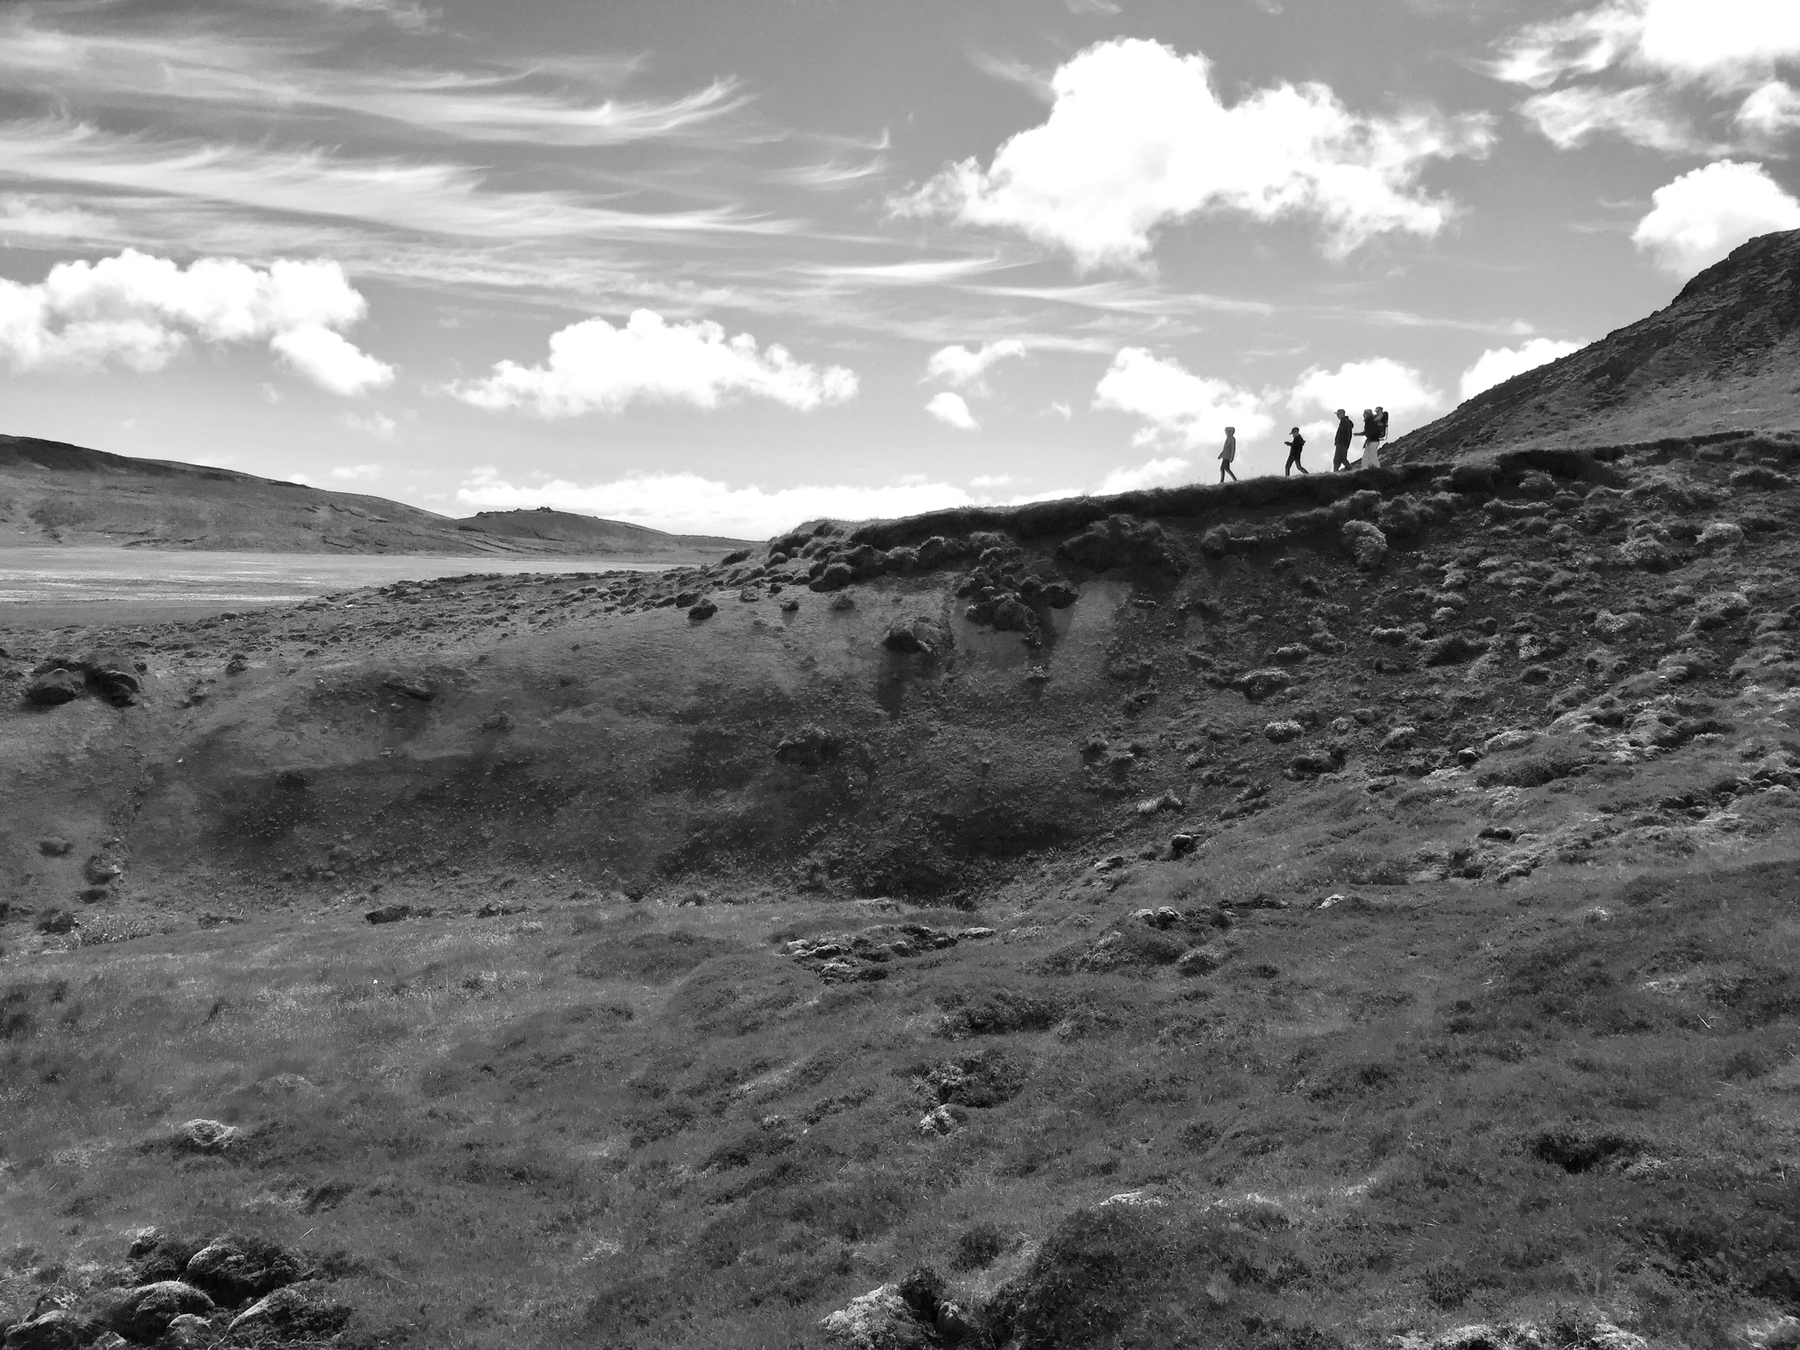 A group of tourists walk along a ridge, appearing in silhouette